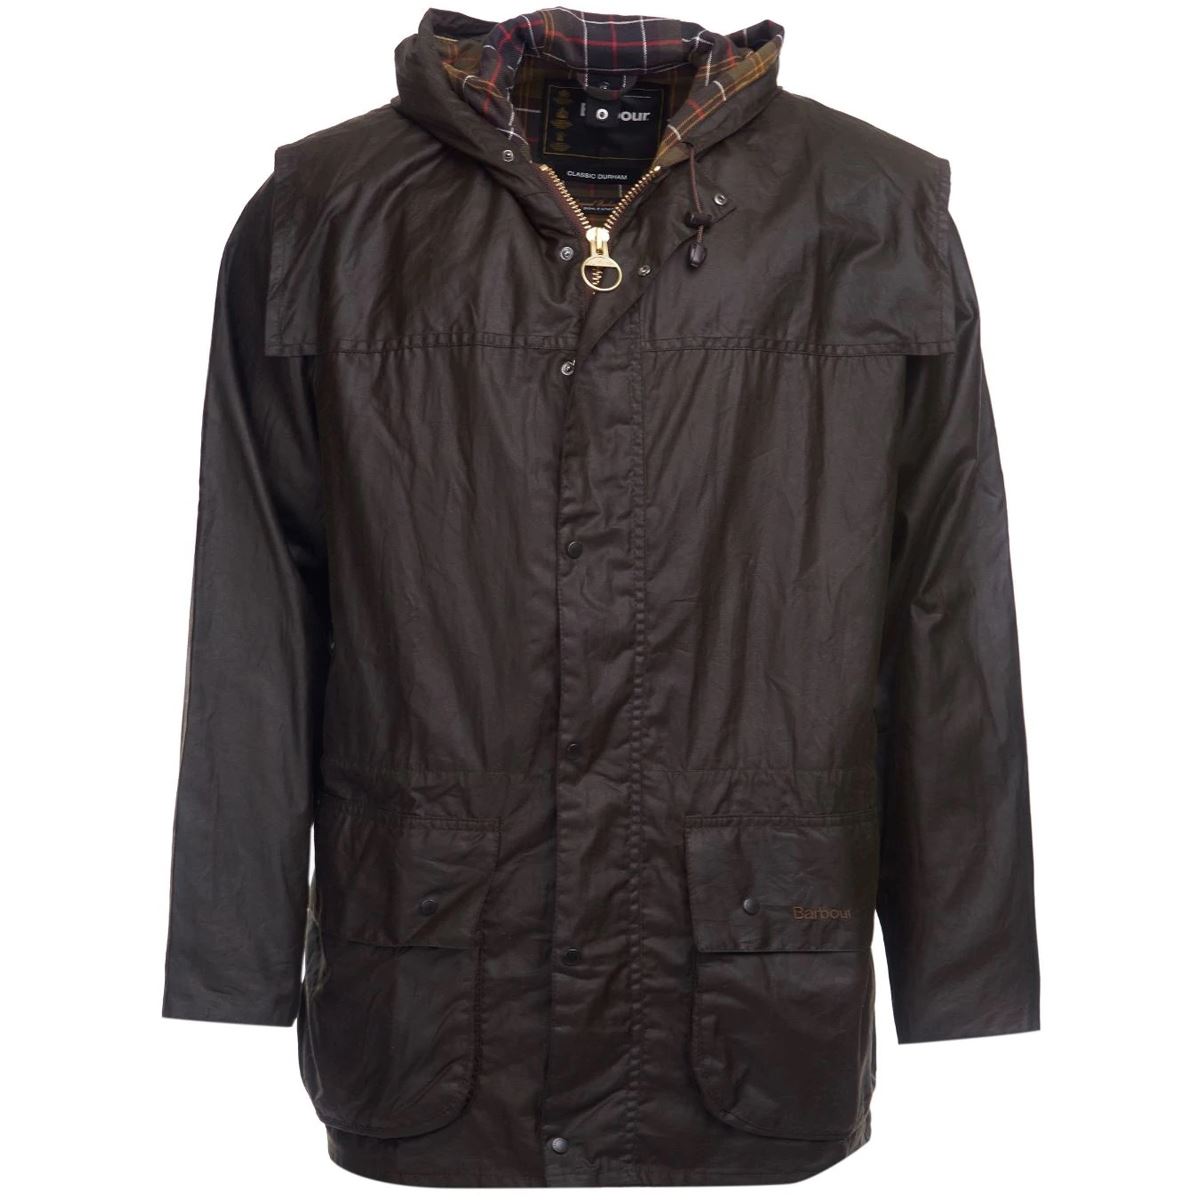 What is the material used in the outer layer of the barbour durham jacket?